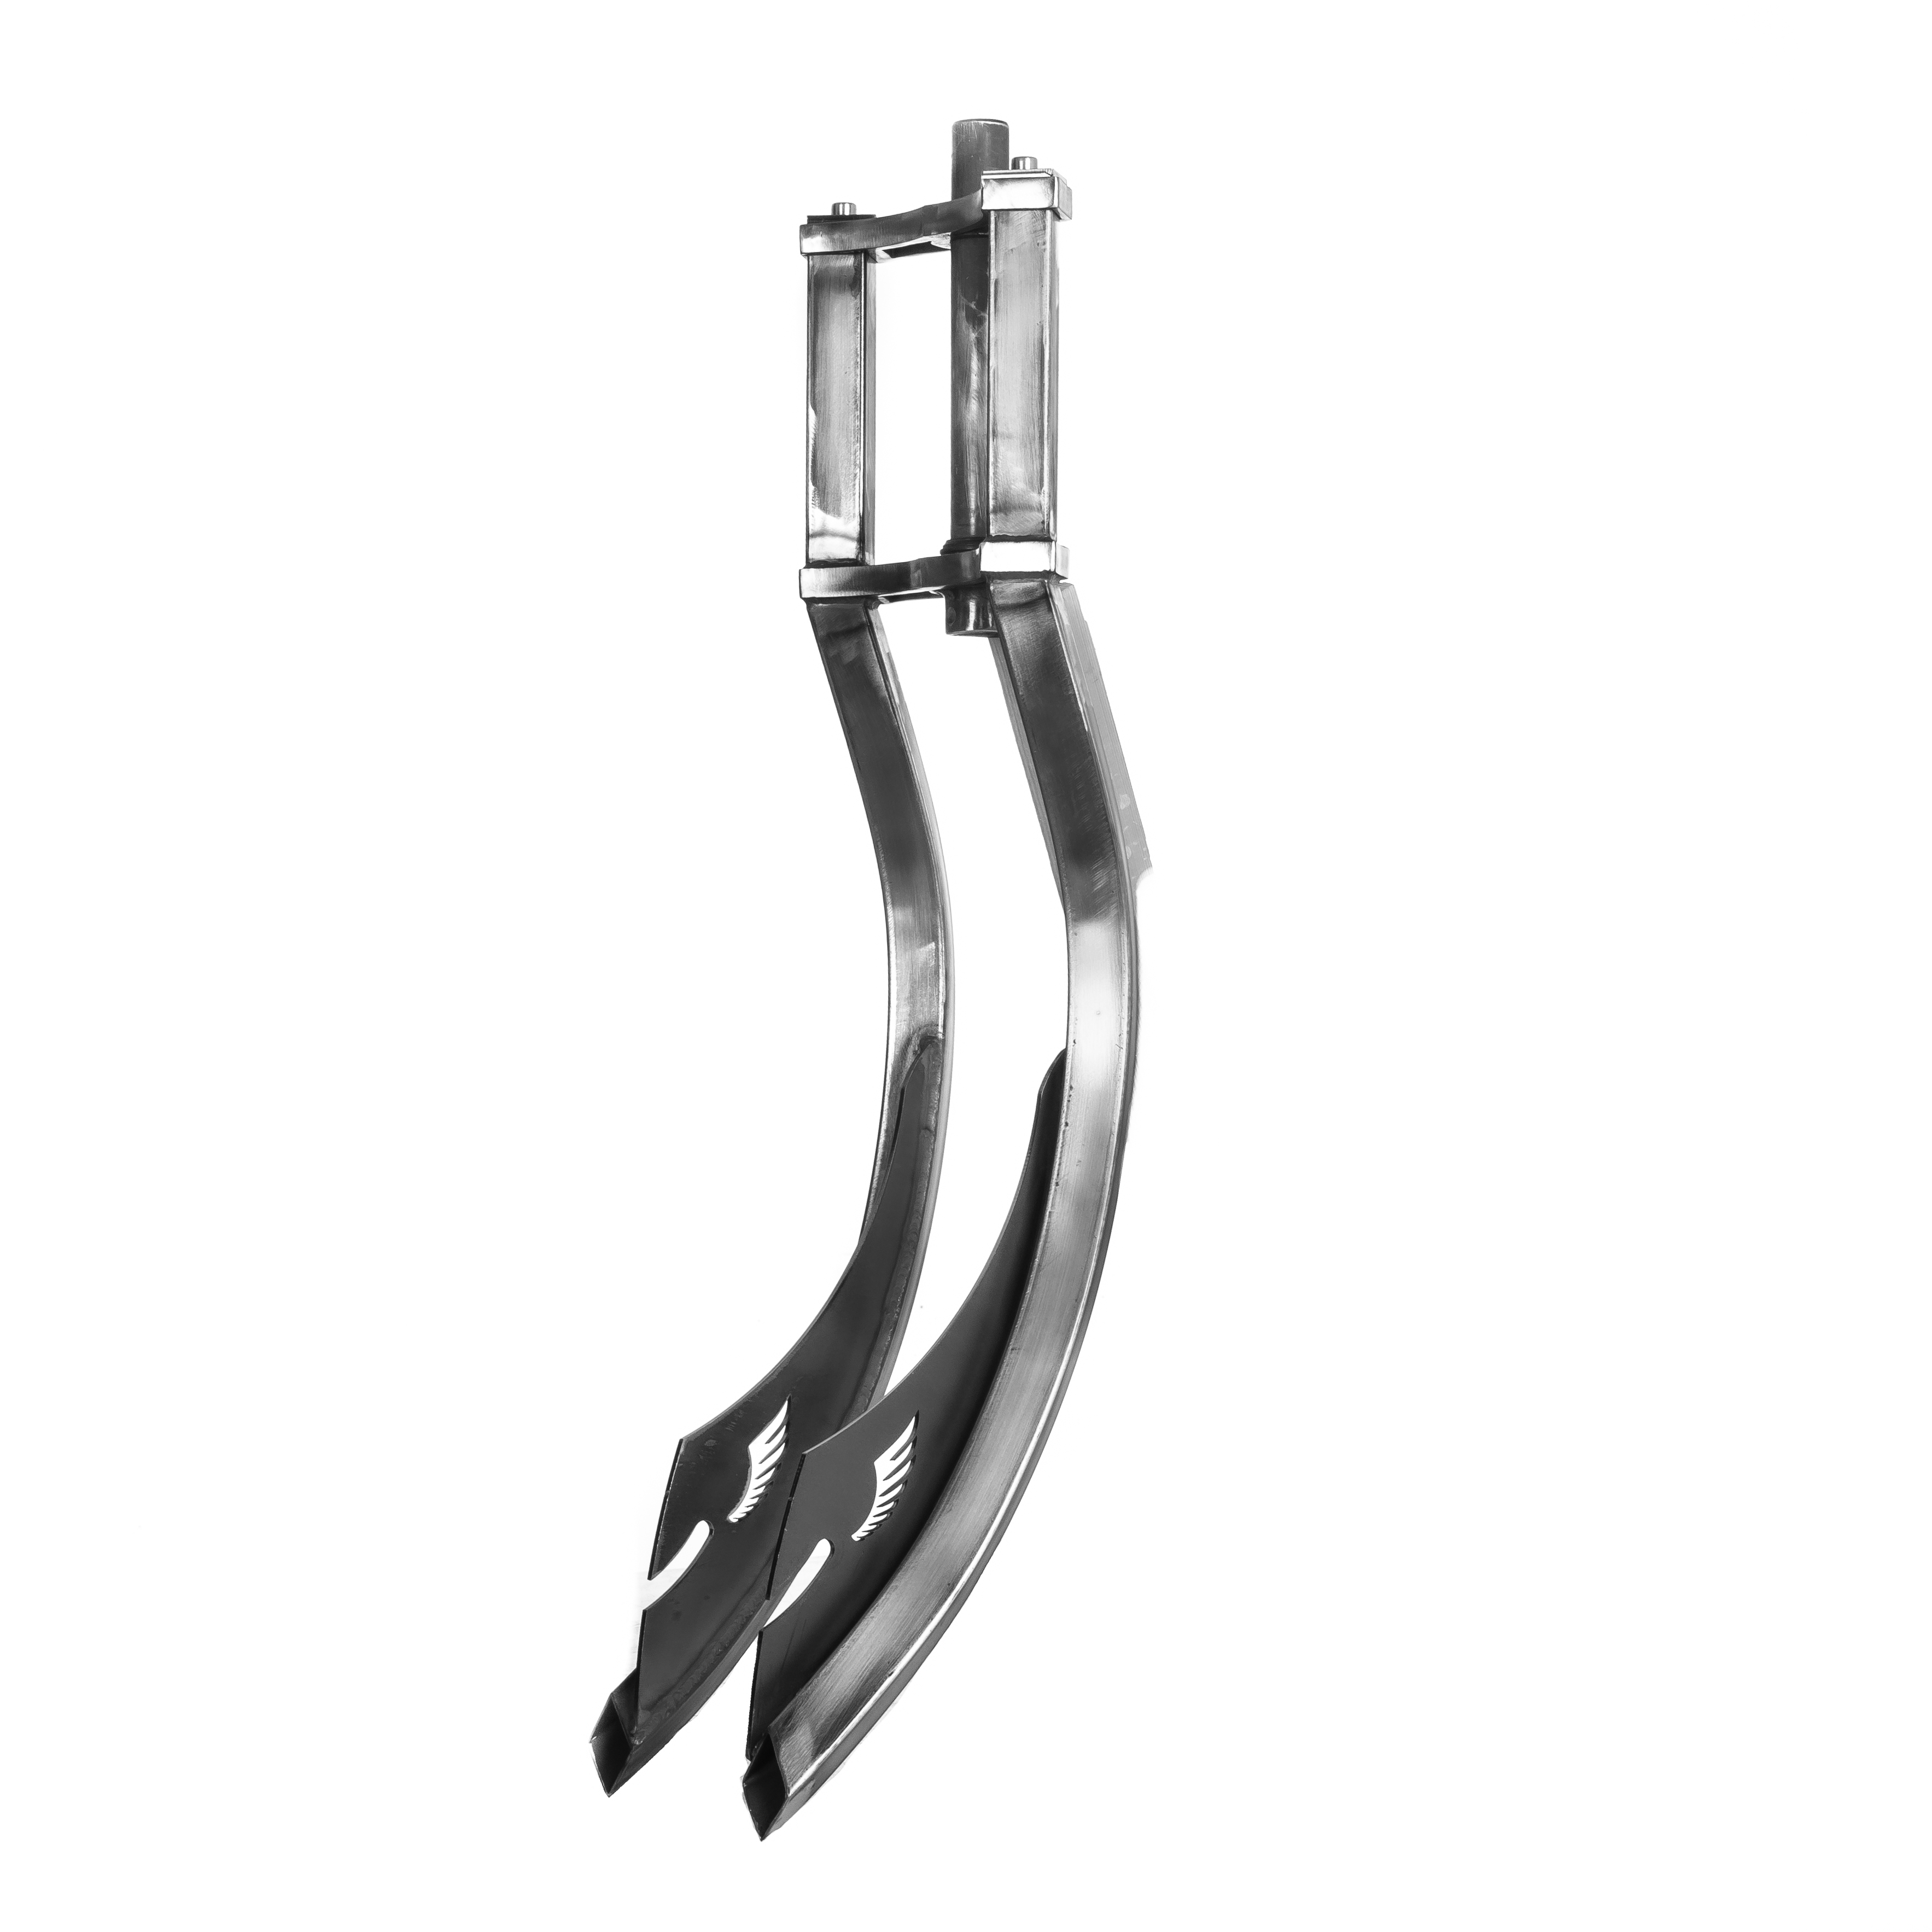 Blade Fork ALCB double crown, double down raw 1 1/8 steerer